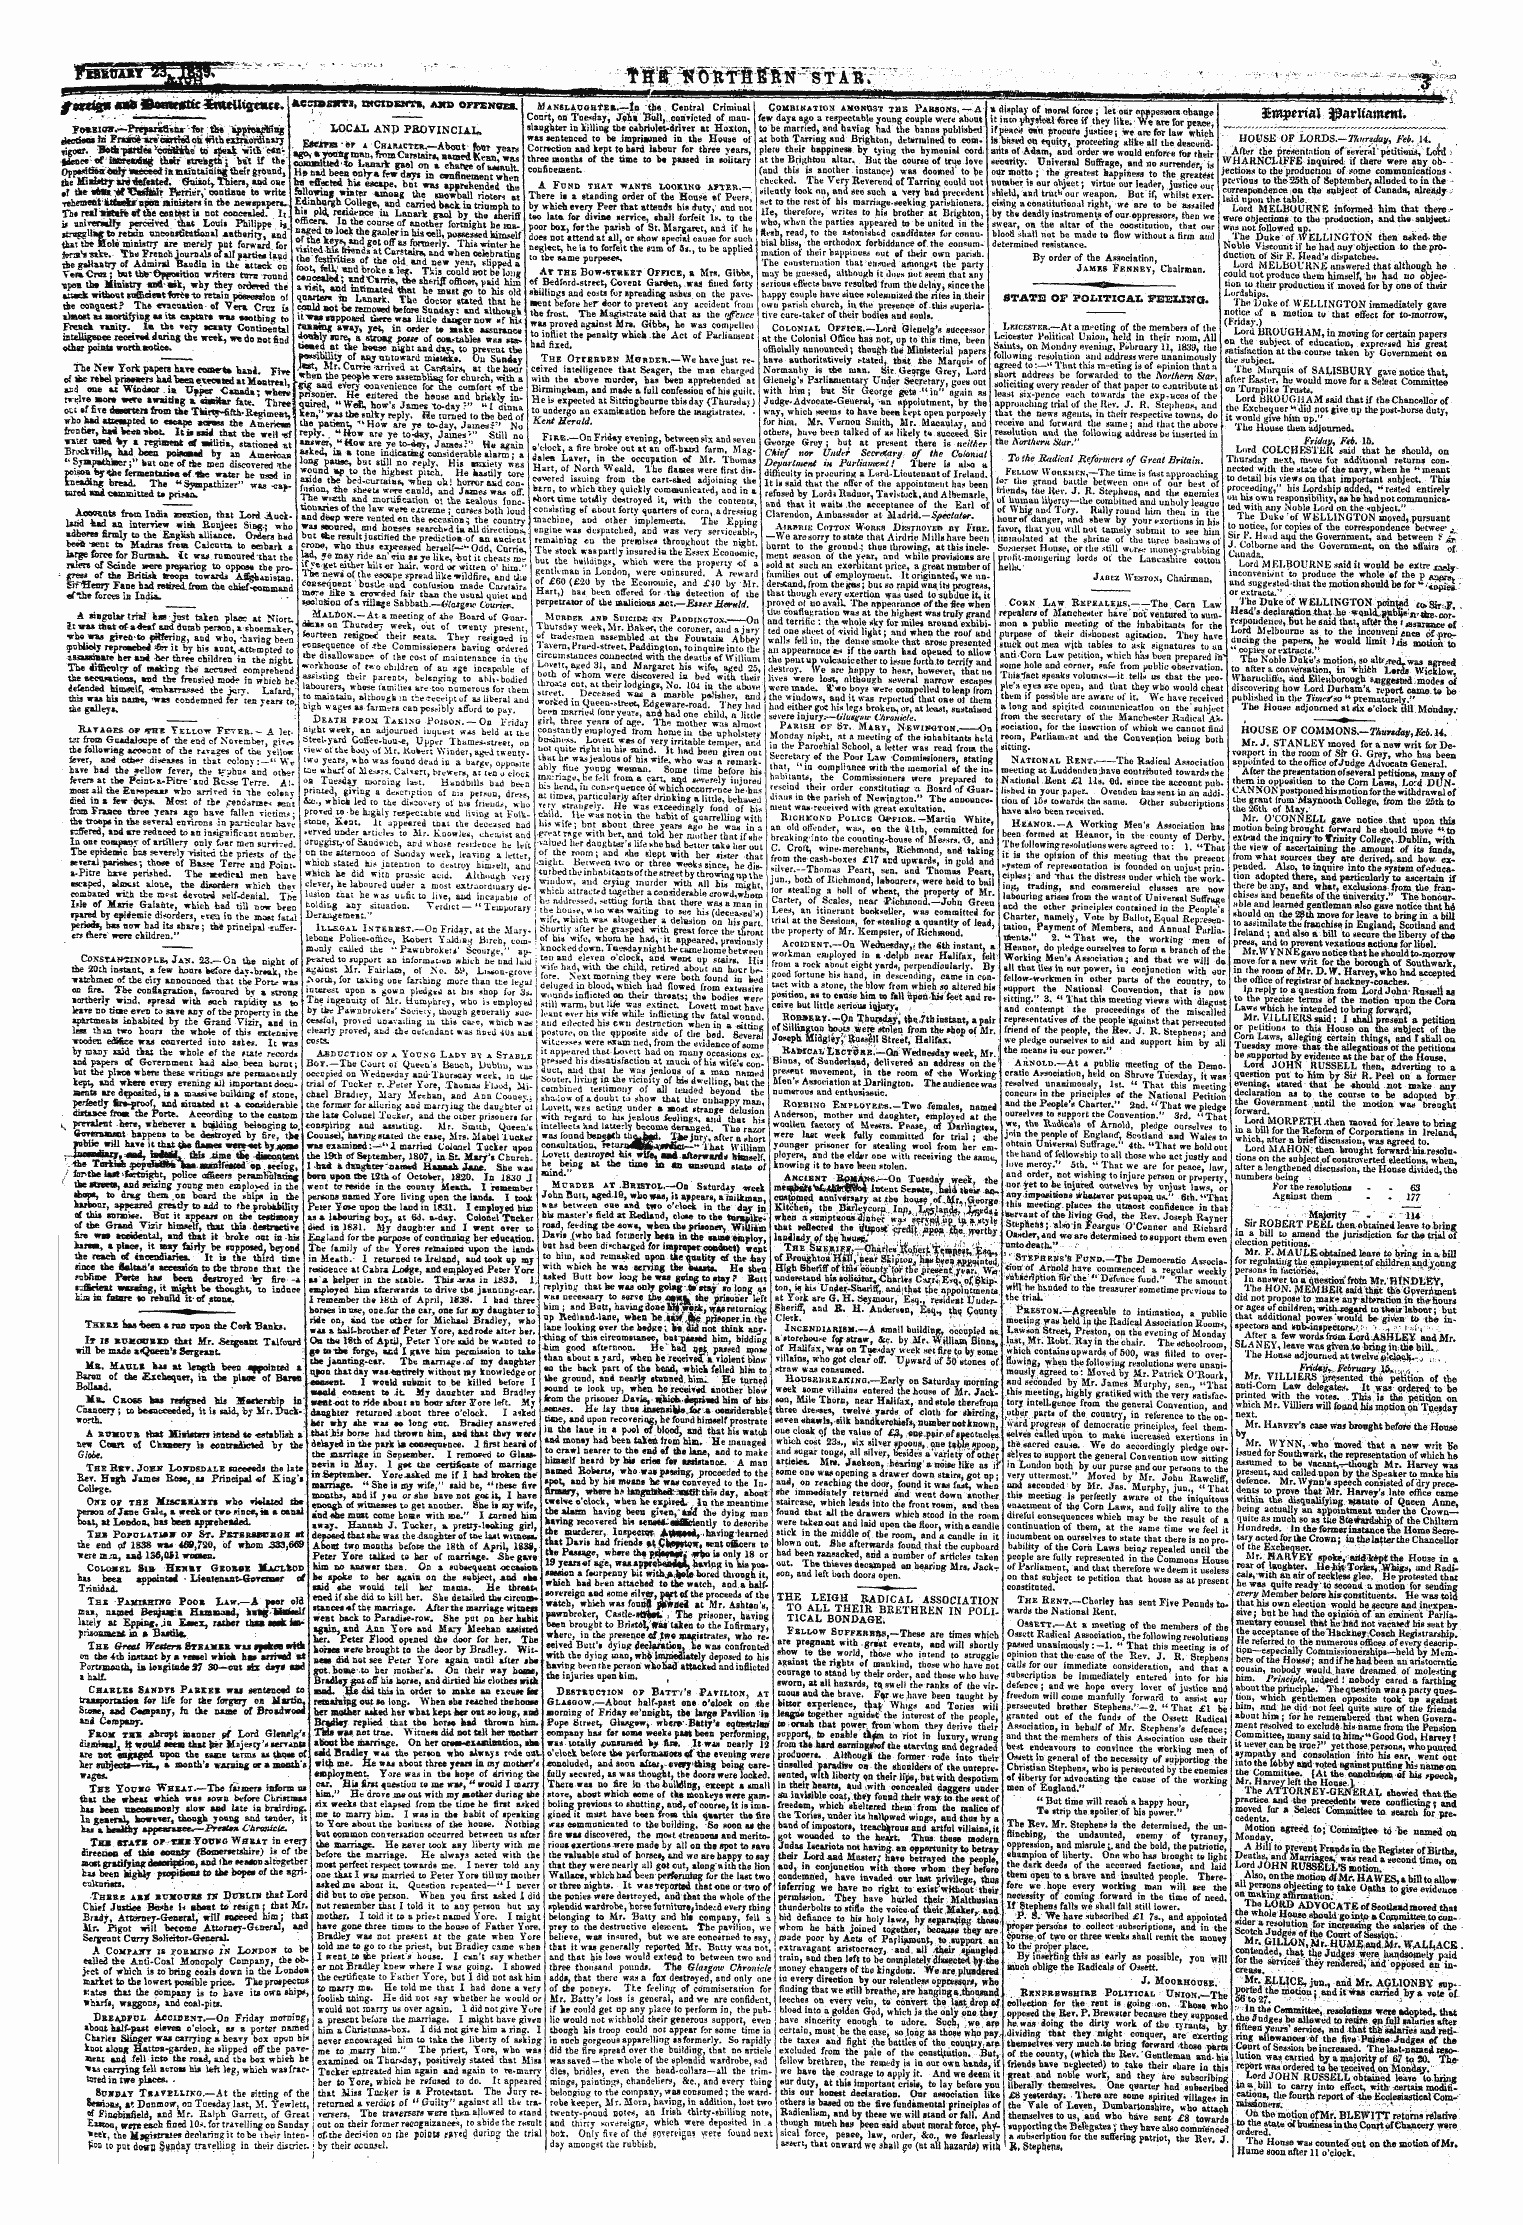 Northern Star (1837-1852): jS F Y, 1st edition - Untitled Article